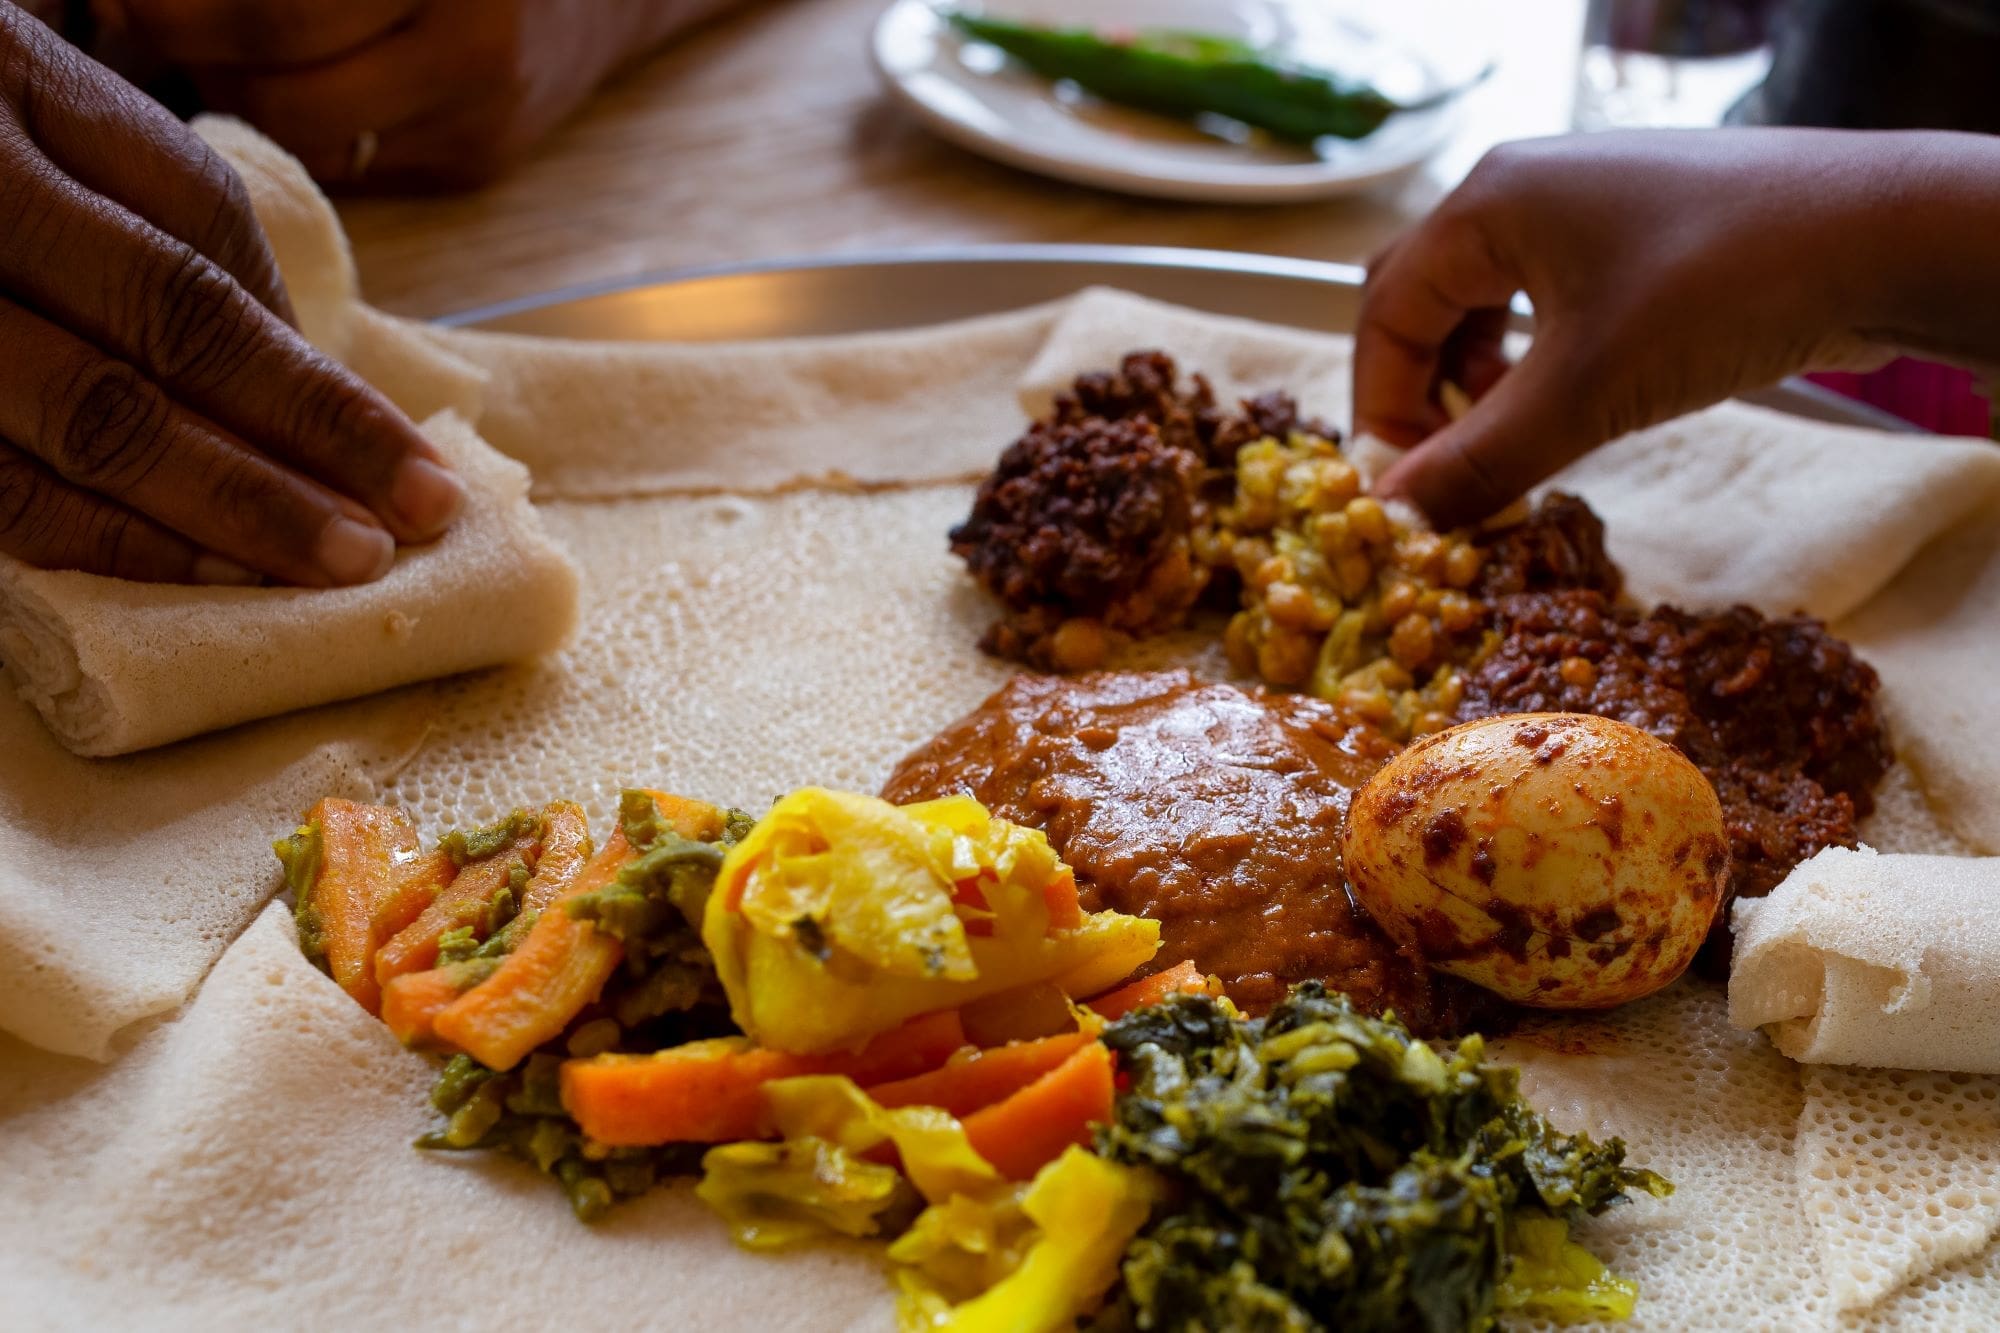 10 Africa’s Cultural Foods You Must Try